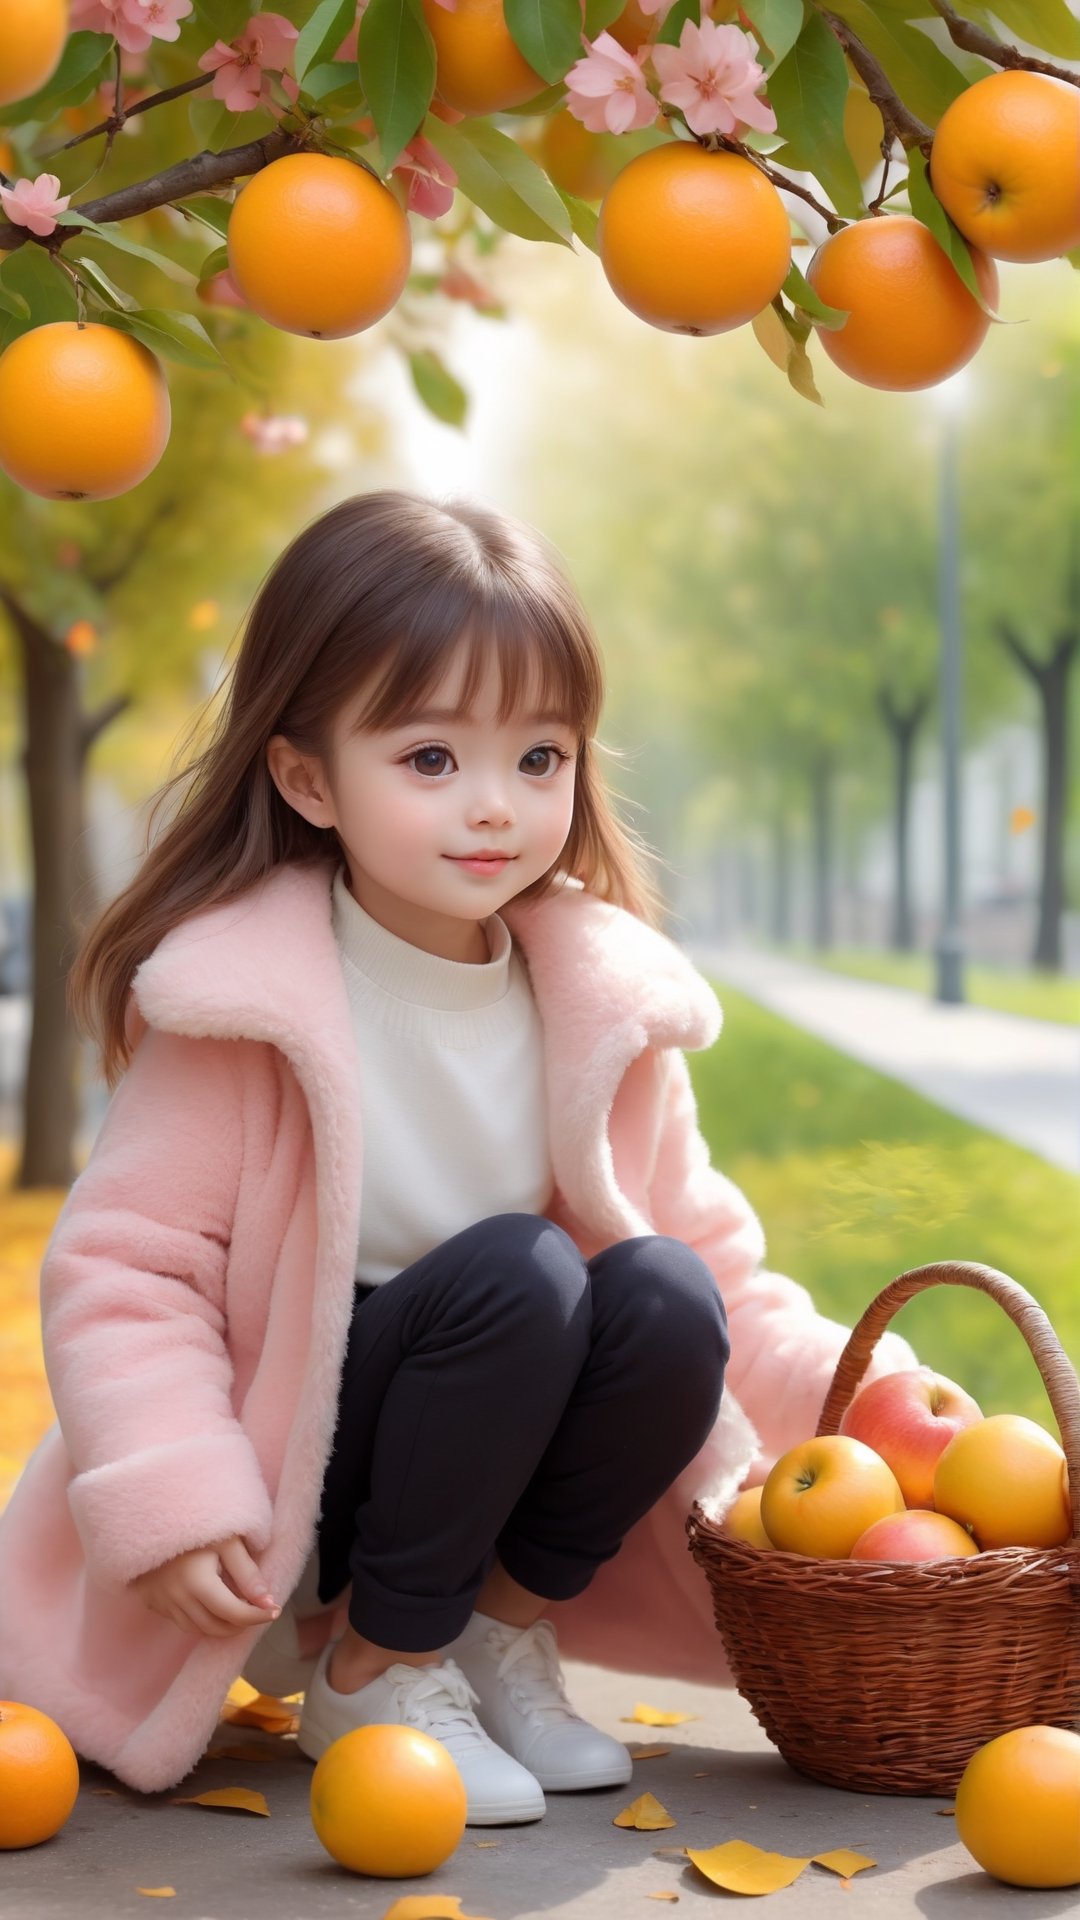 Side view shot, Turn around and look ahead, A beautiful big eyes and adorable little girl with two cute little fluffy fat kittens wearing pink coat walking on the orange tree branch and Picking oranges from the treeand street, smiled happily, Autumn style, realistic high quality orange tree, oranges full the branch, maple leaves falling, big eyes so cute and beautiful, under the tree have a table, and apples and beautiful flowers, maple leaves falling, orange near flowers, Turn around and look viewers , pink flowers blooming fantastic amazing and romantic lighting bokeh, yellow flowers blooming realistic and green plants amazing tale and lighting as background, Xxmix_Catecat